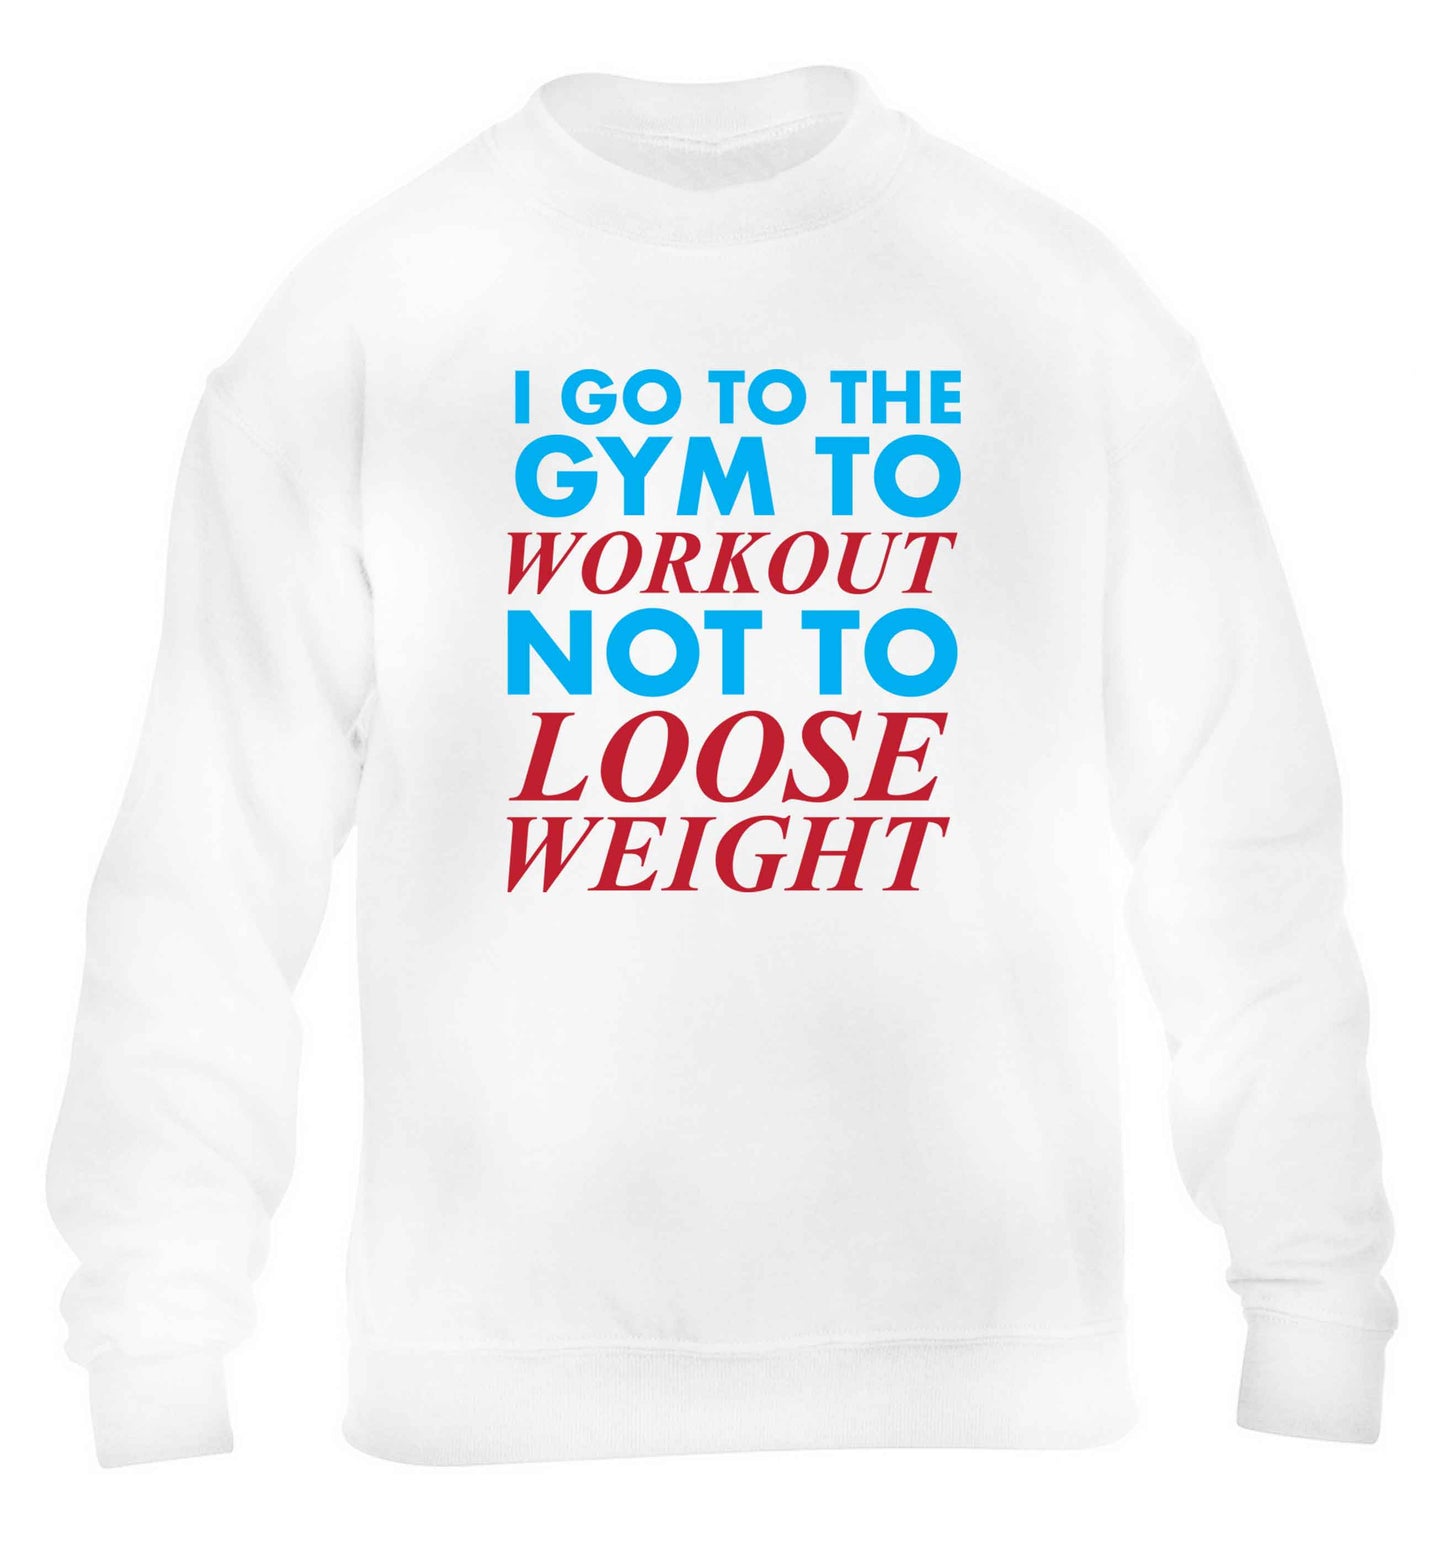 I go to the gym to workout not to loose weight children's white sweater 12-13 Years